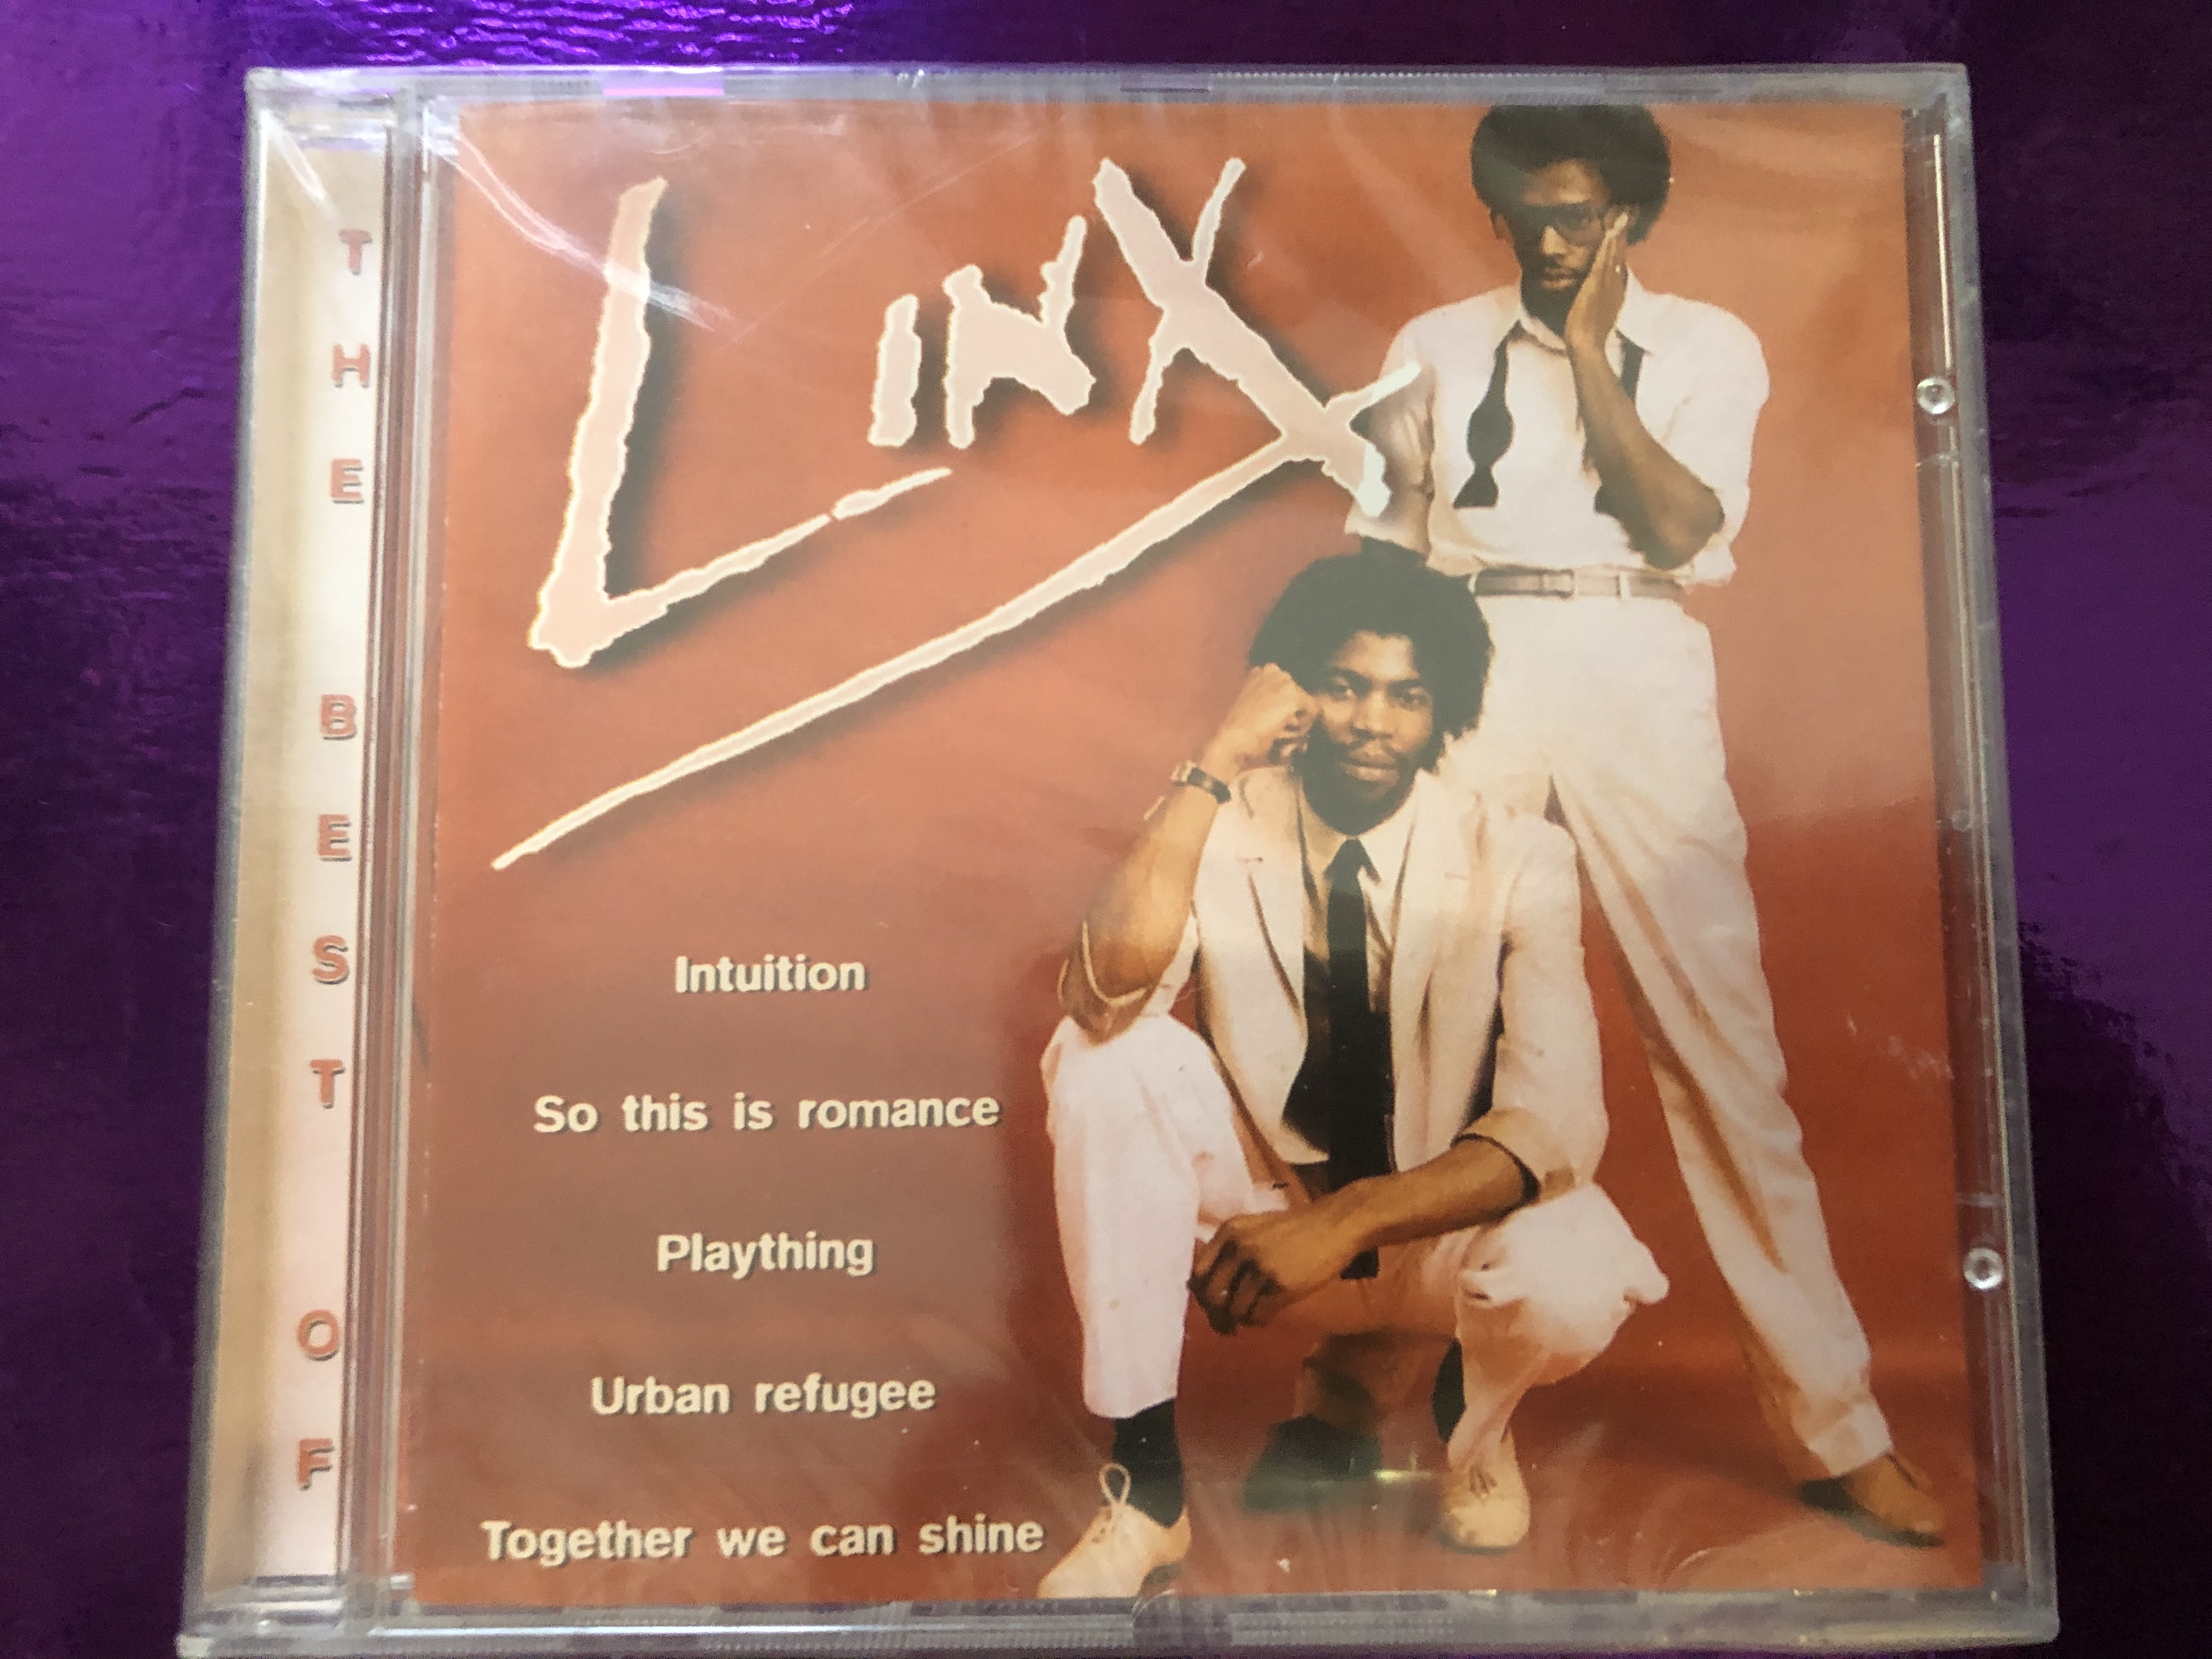 the-best-of-linx-intuition-so-this-is-romance-plaything-urban-refugee-together-we-can-shine-disky-audio-cd-1996-dc-865942-1-.jpg